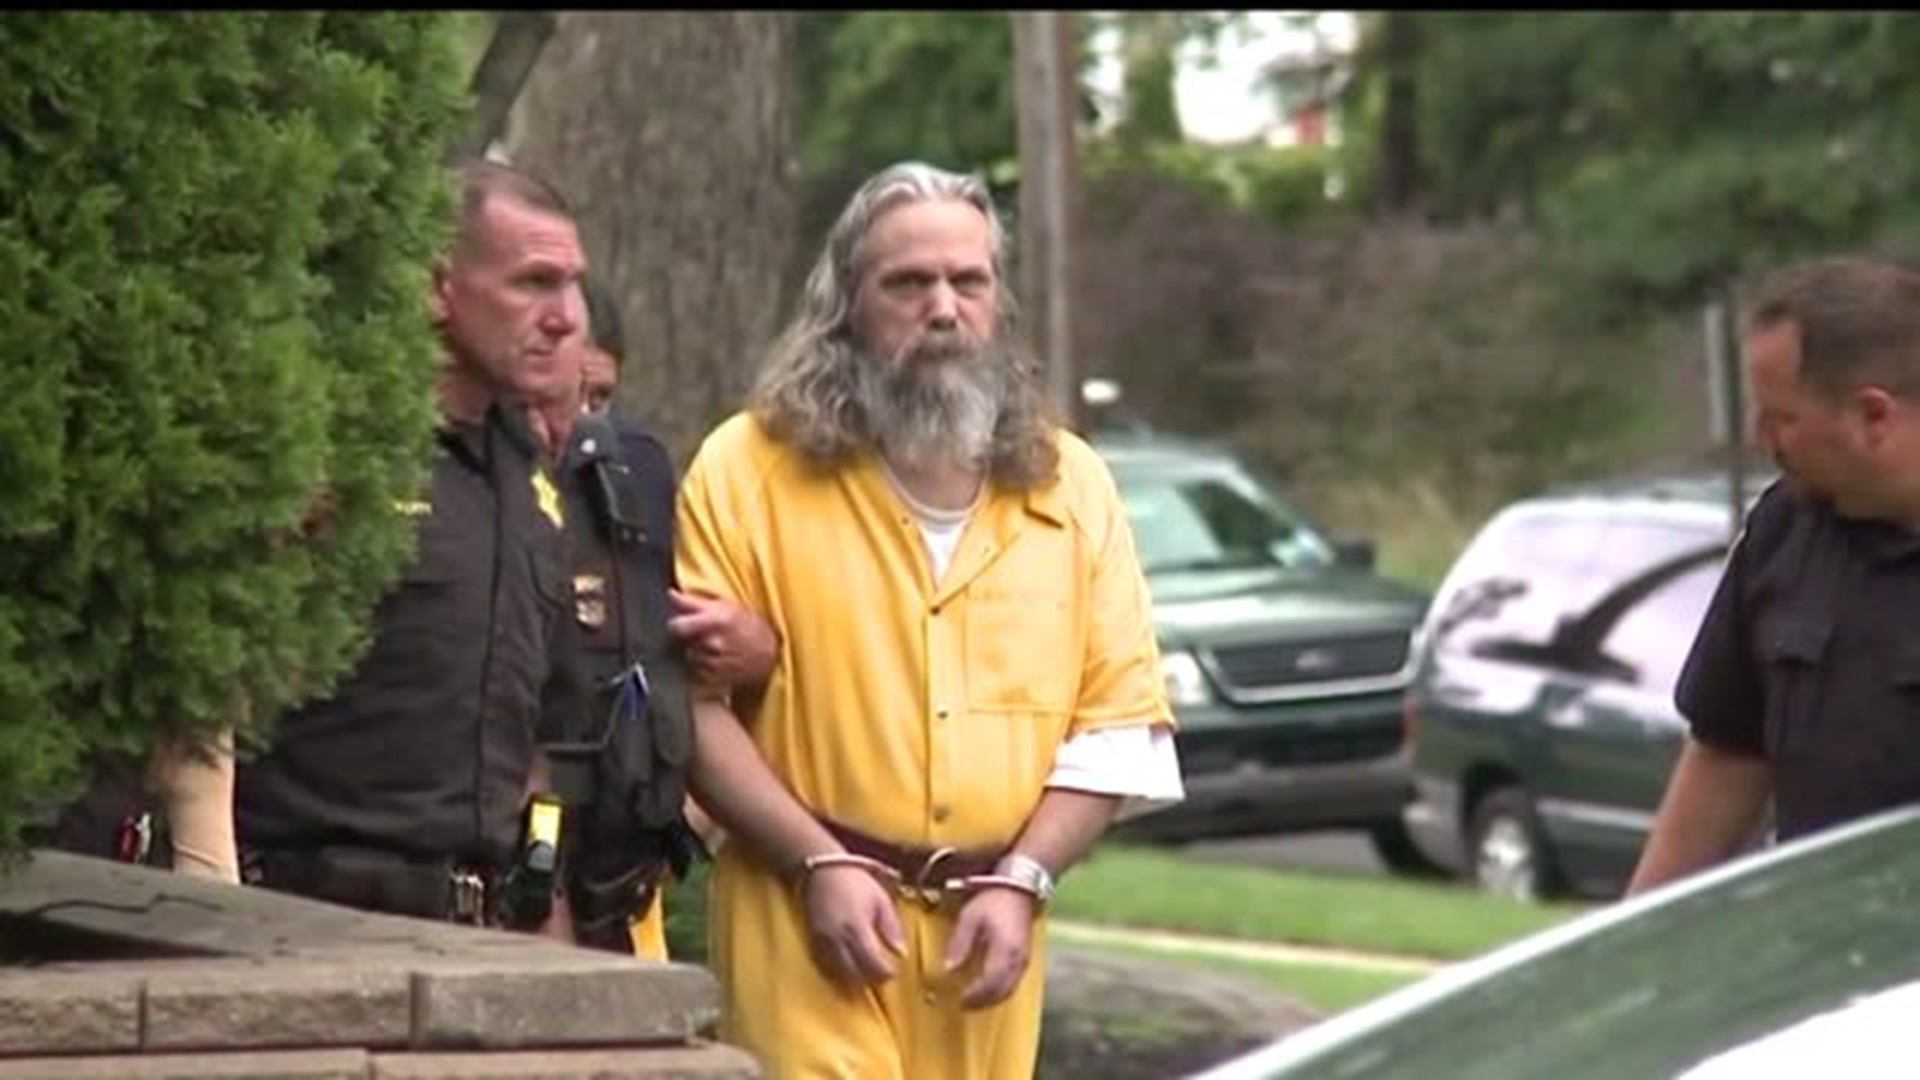 `Cult figure` charged with raping 5 sisters in Amish gifting case